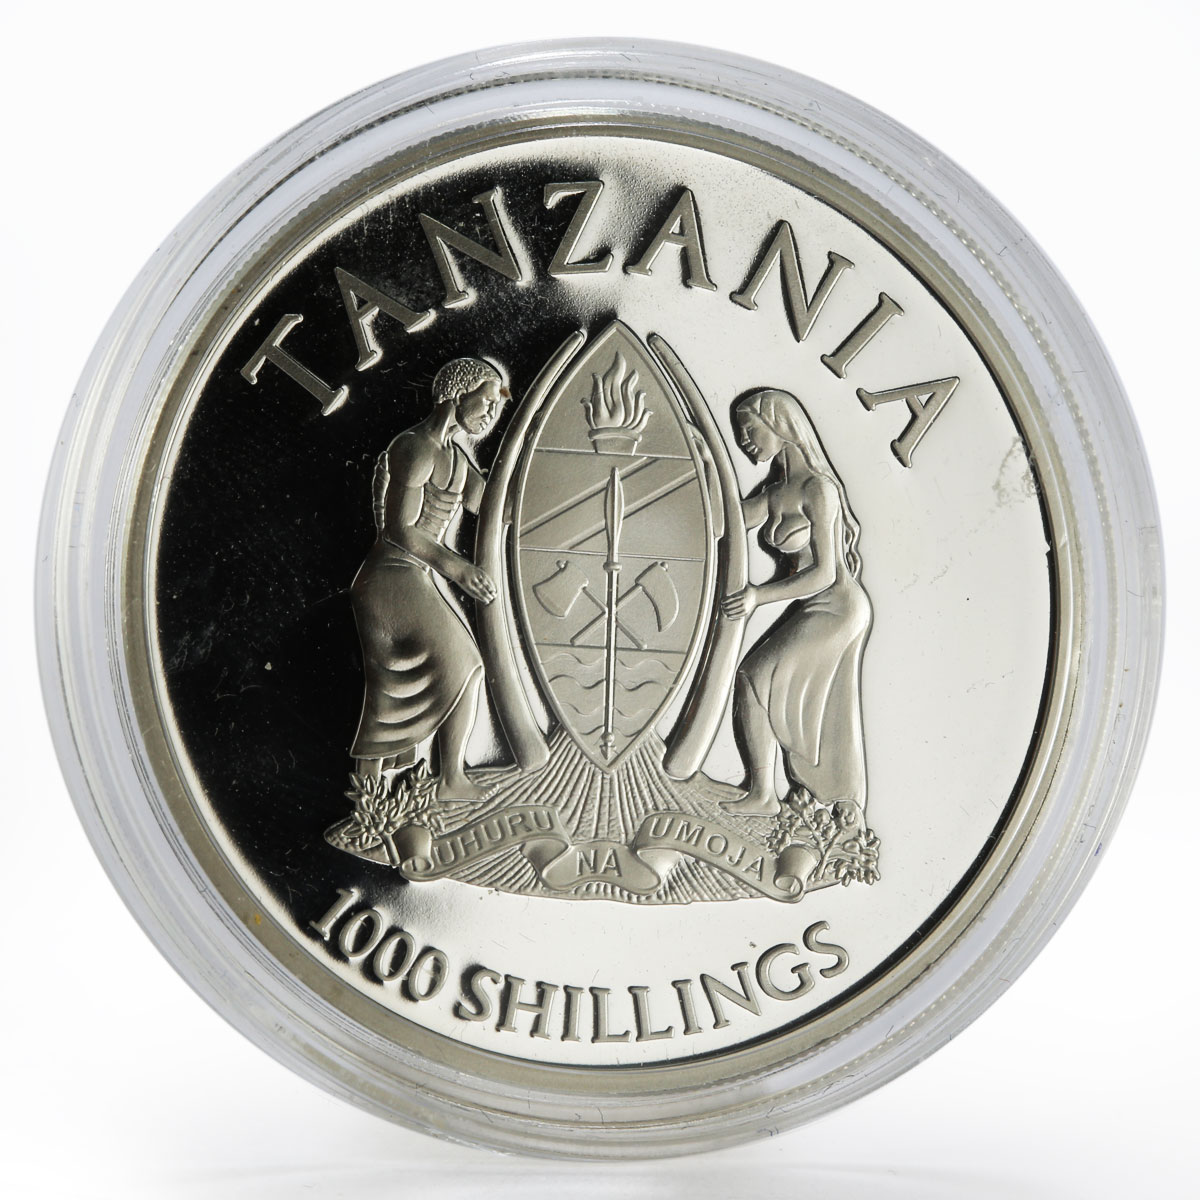 Tanzania 1000 shillings Canonization of Popes gilded silver proof coin 2014